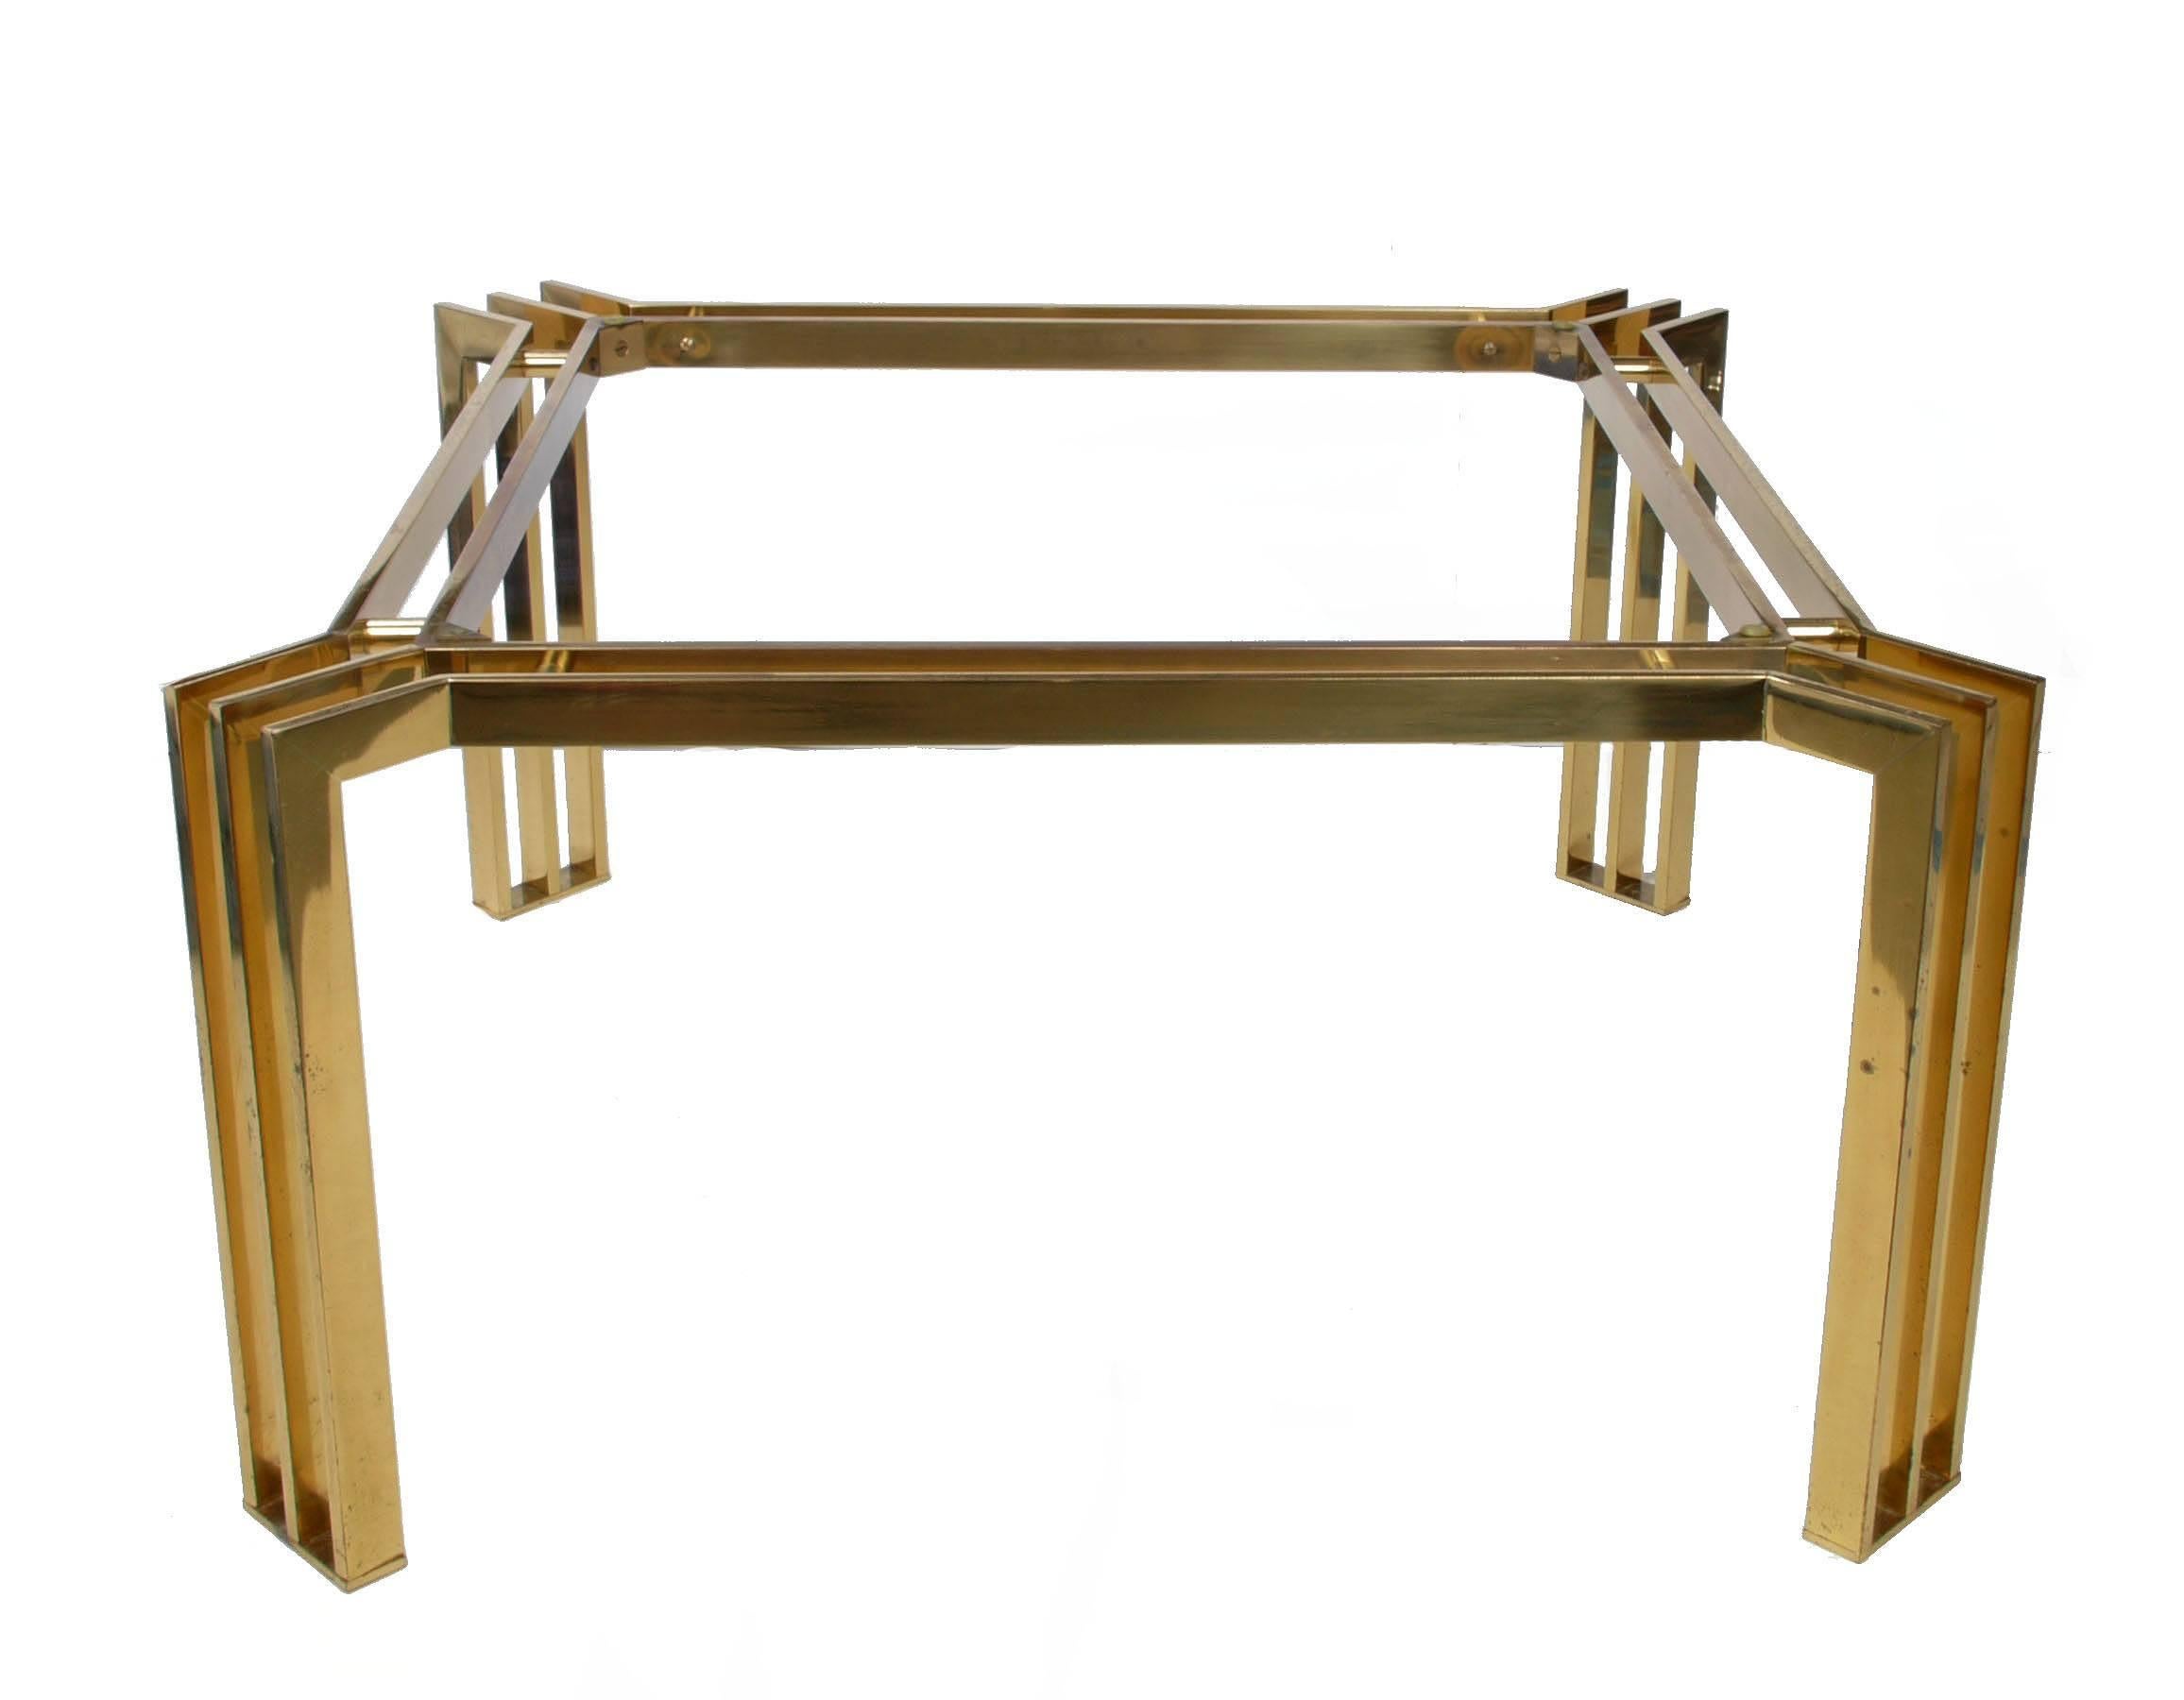 Square Italian brass coffee table with brass spacers.
Marked underneath: 